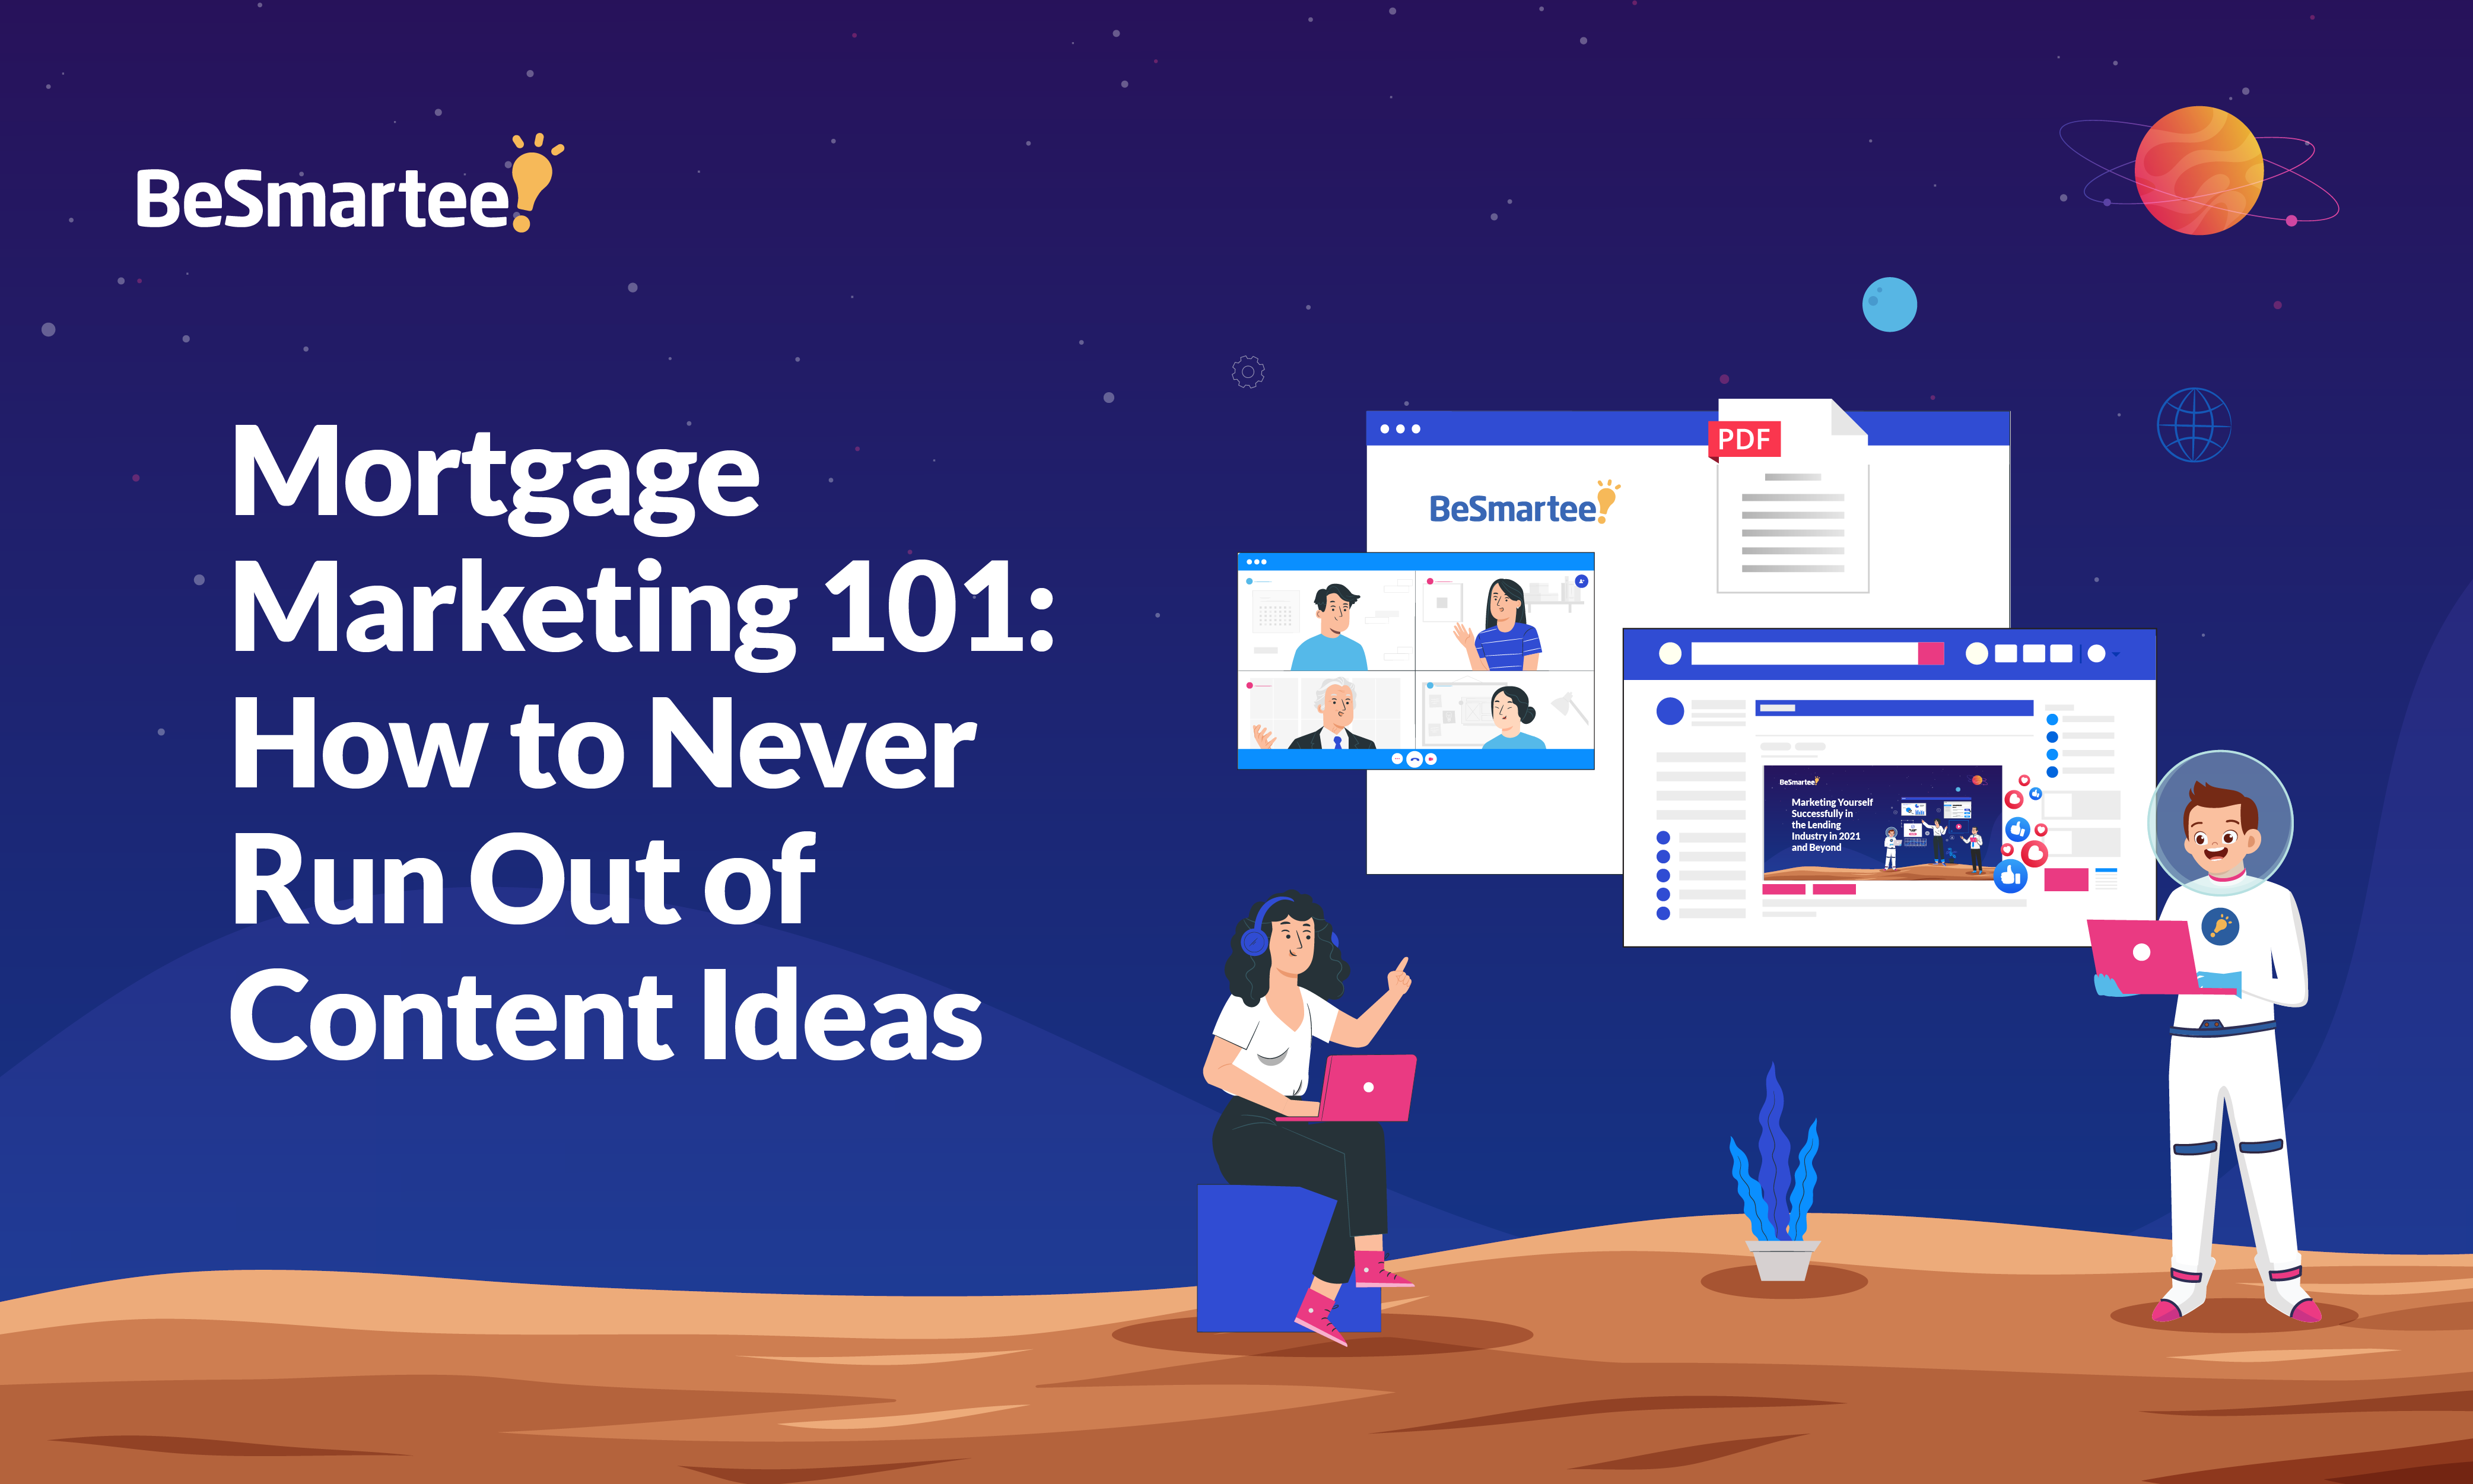 Mortgage Marketing 101: How to Never Run Out of Content Ideas